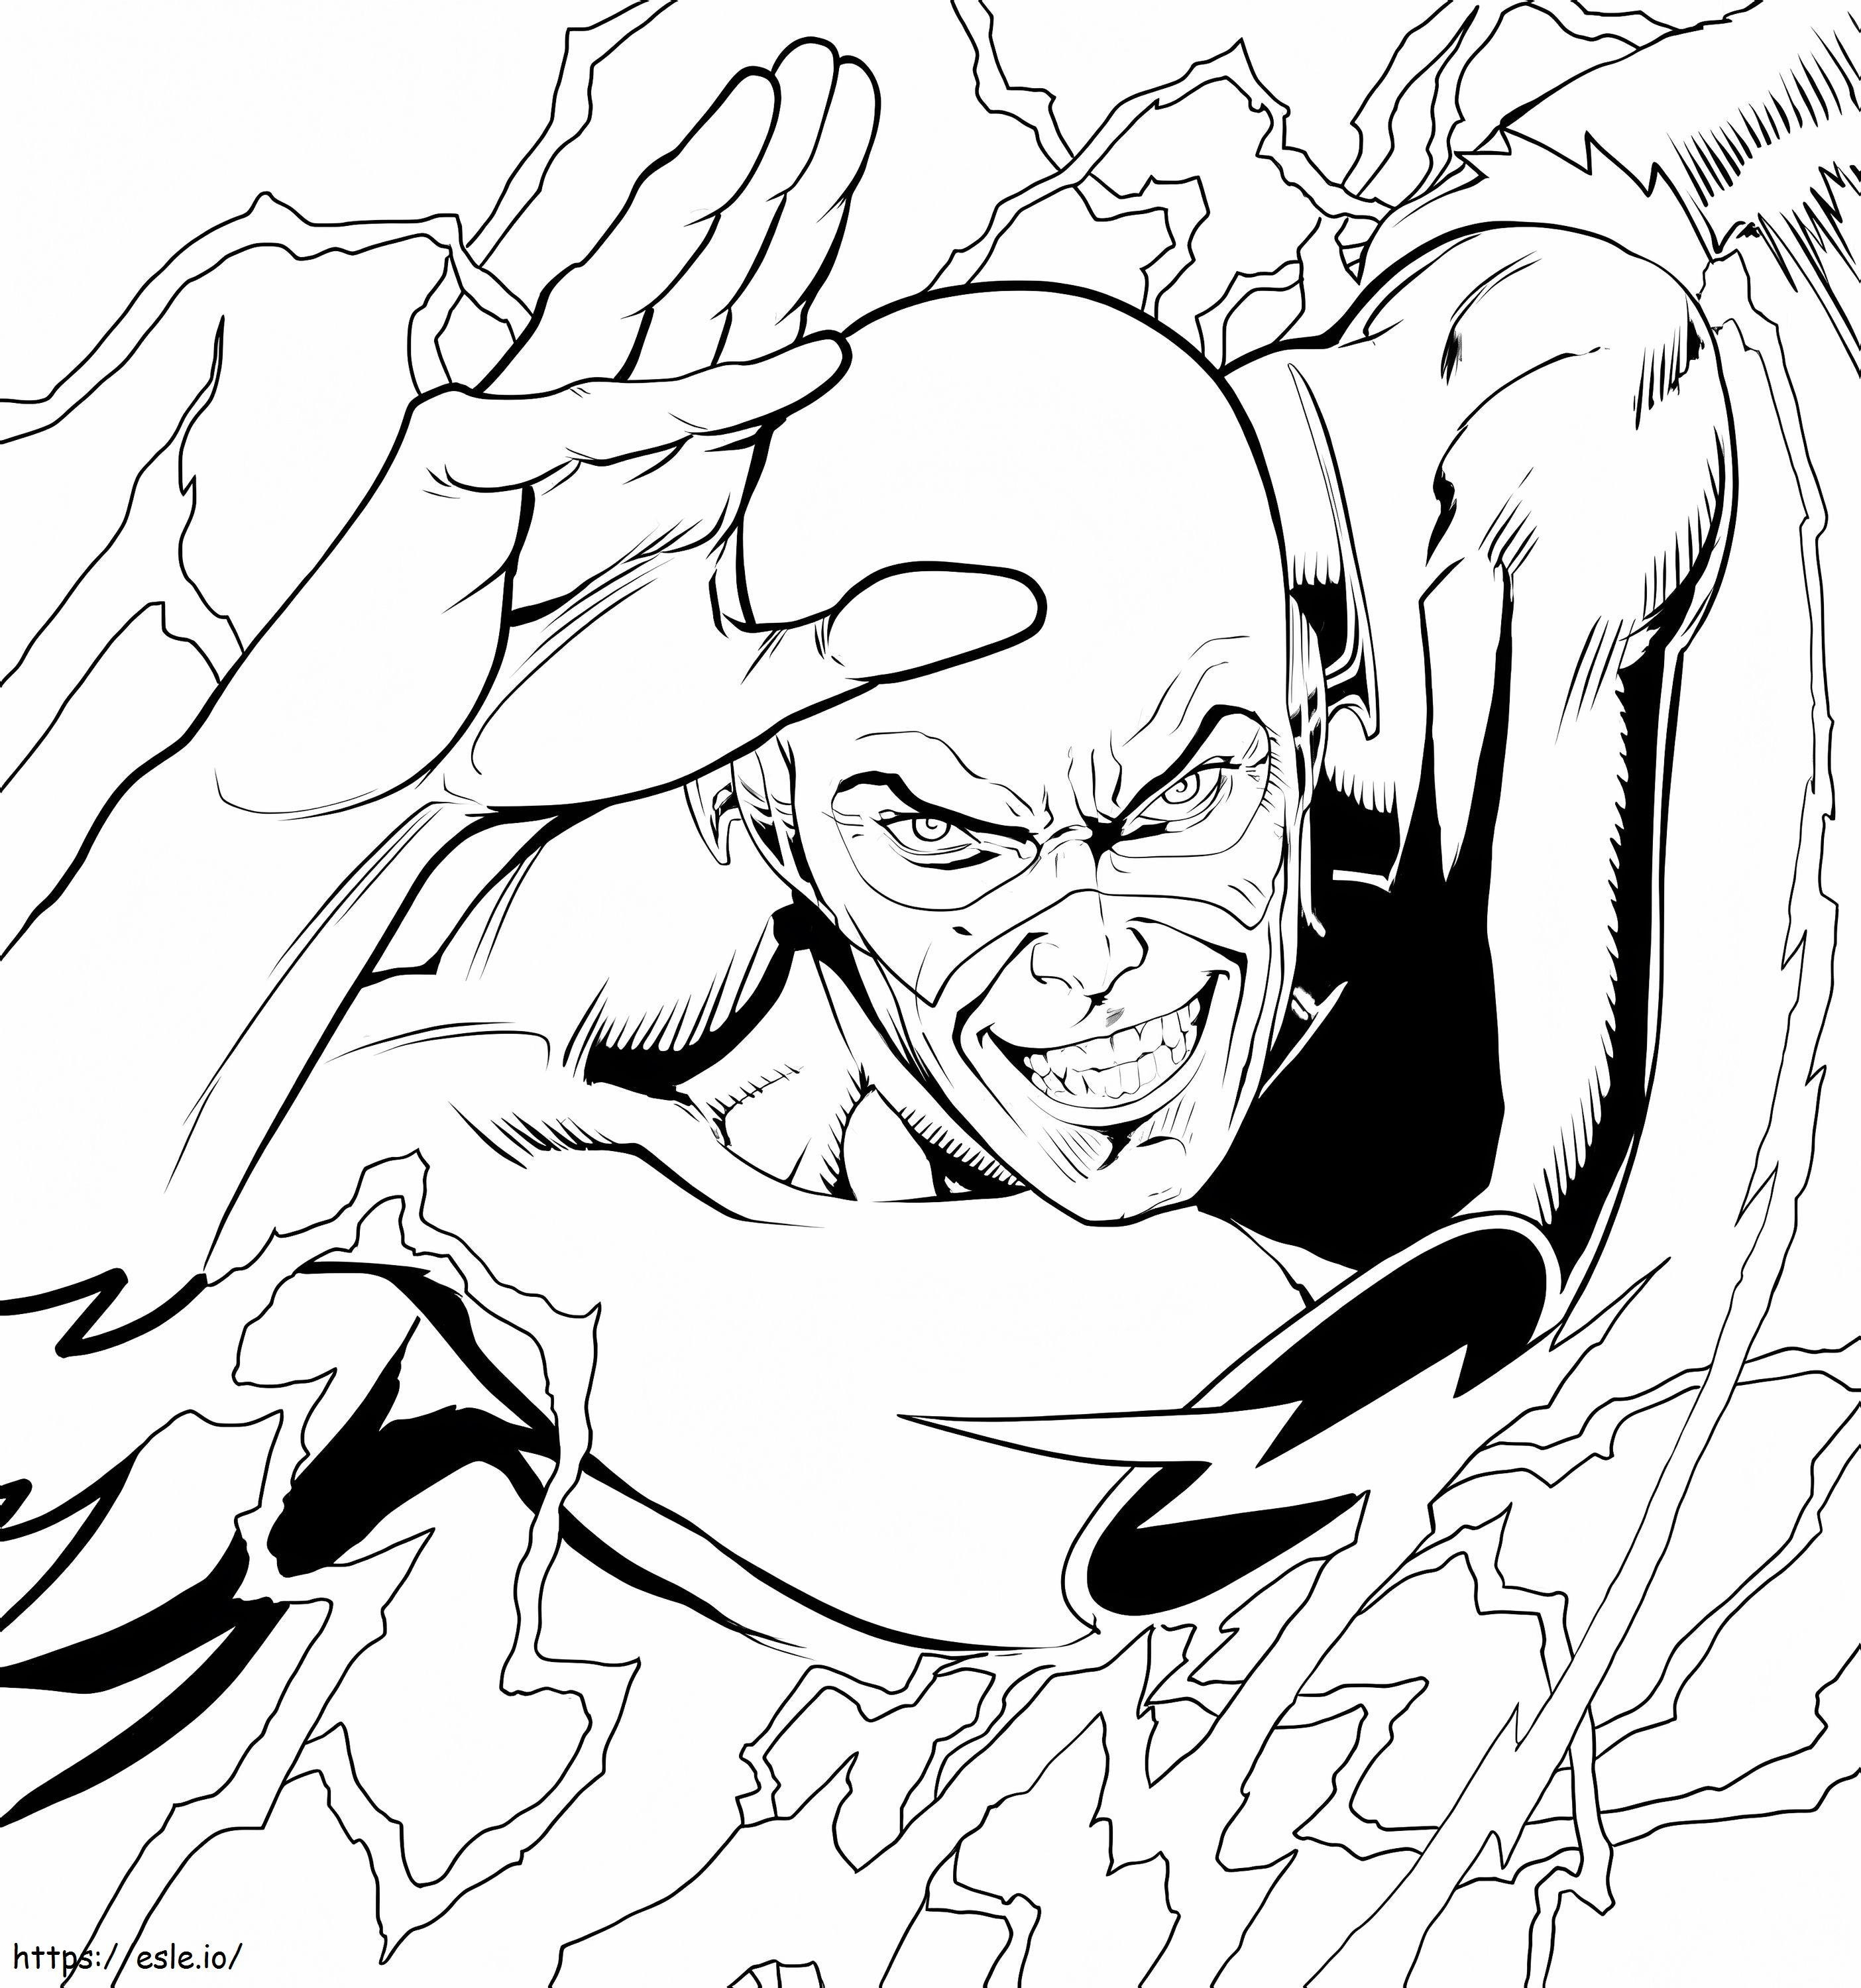 The Flash Smiling coloring page